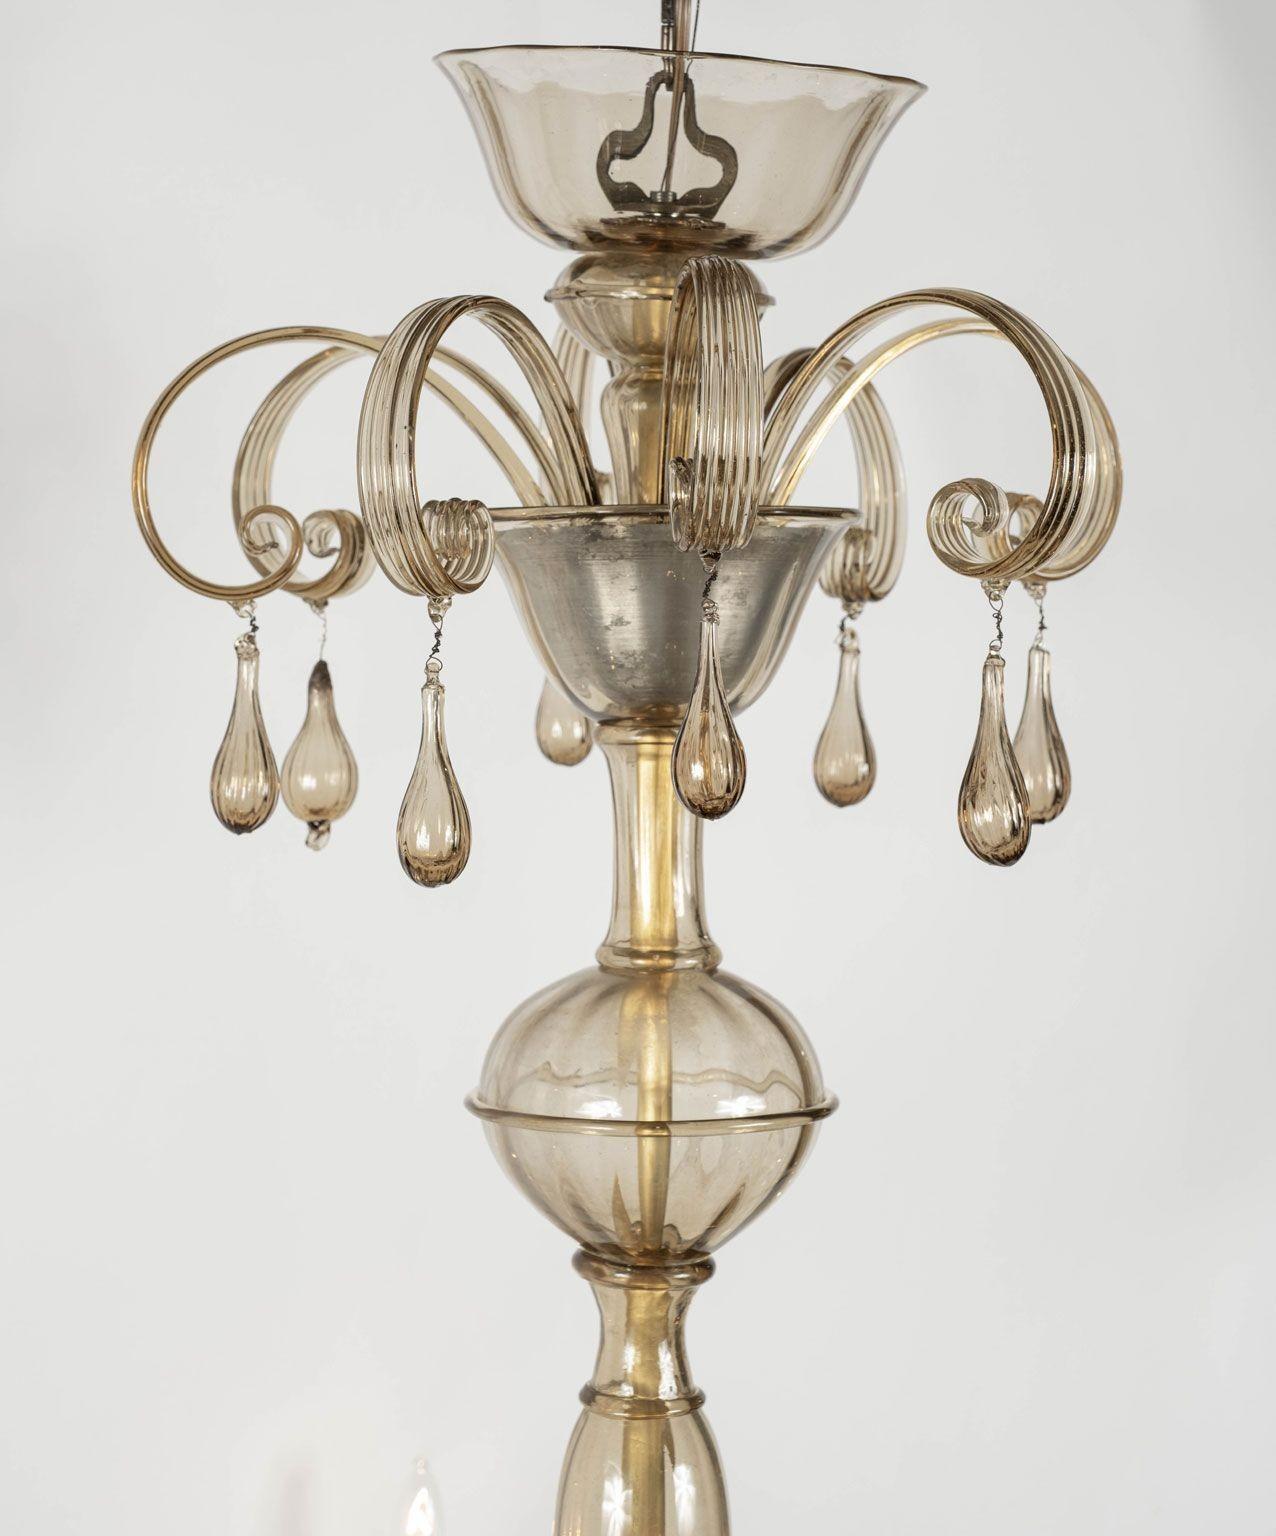 Clear taupe color glass Murano chandelier circa 1930-1949. Clear glass tinted a taupe-champagne-nicotine color. Includes chain and canopy (listed height does not include chain).